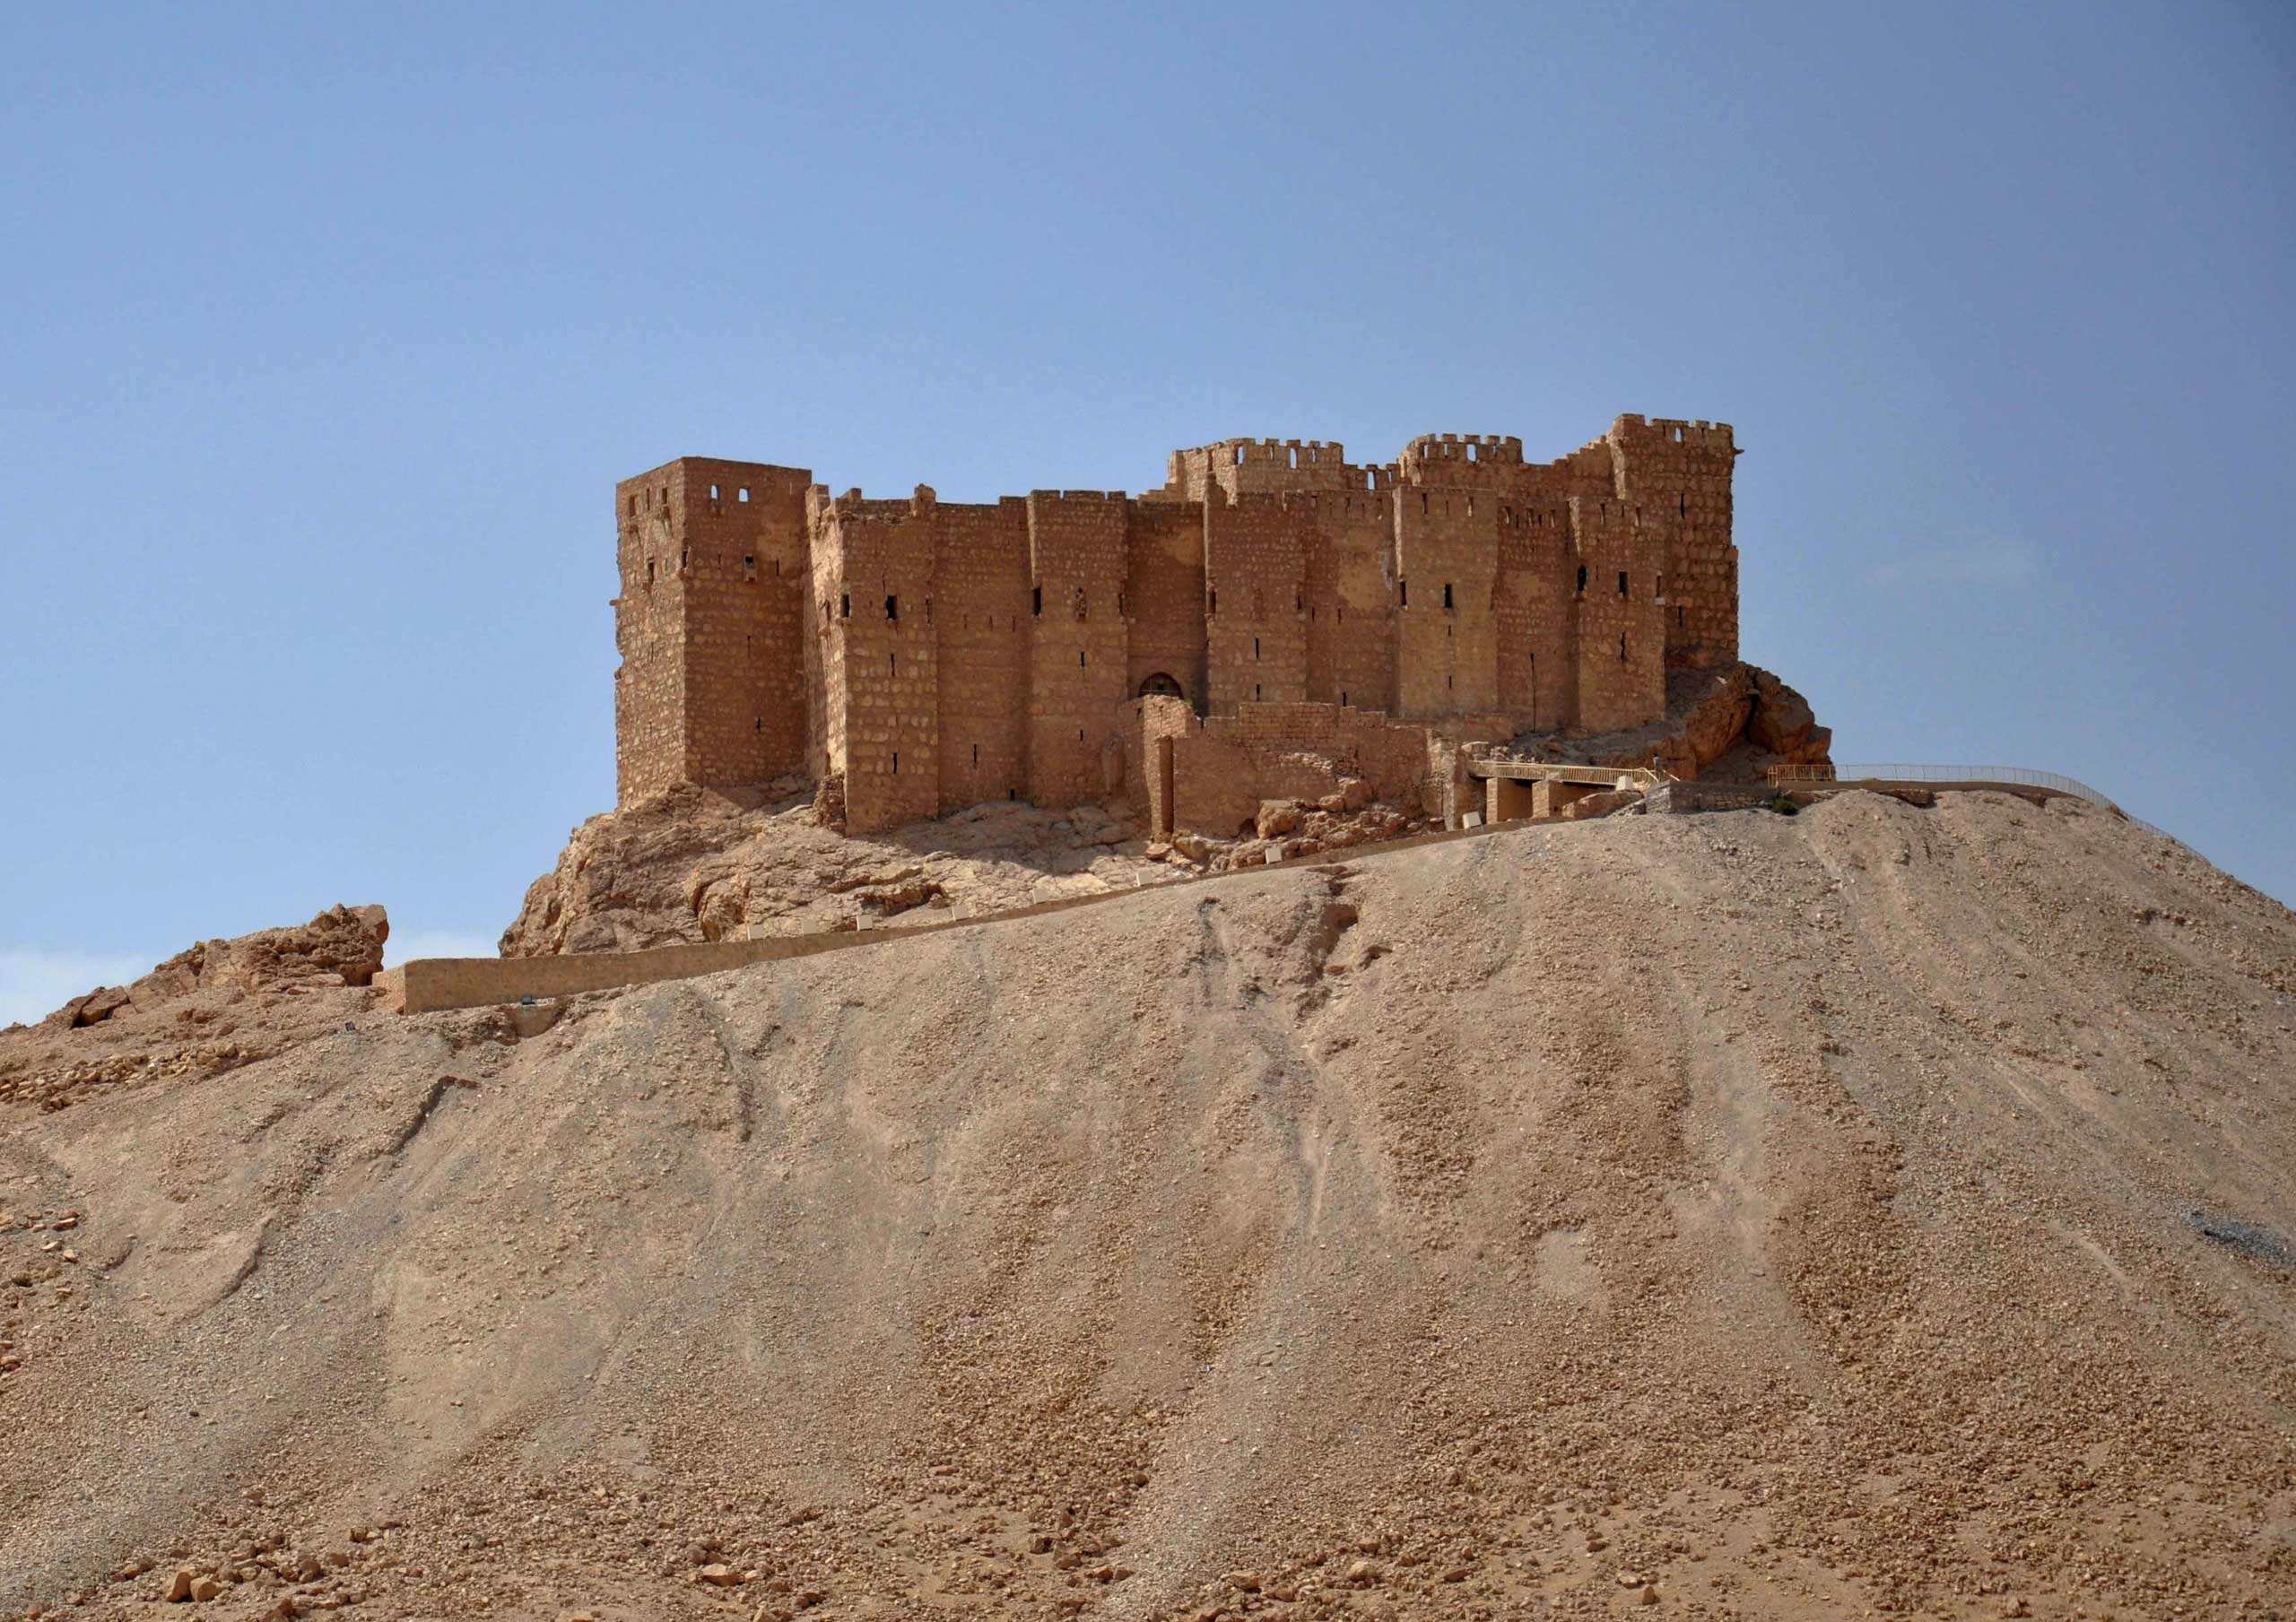 The castle of the ancient Syrian city of Palmyra on May 18, 2015, a day after ISIS militants fired rockets into the city and killed five people.